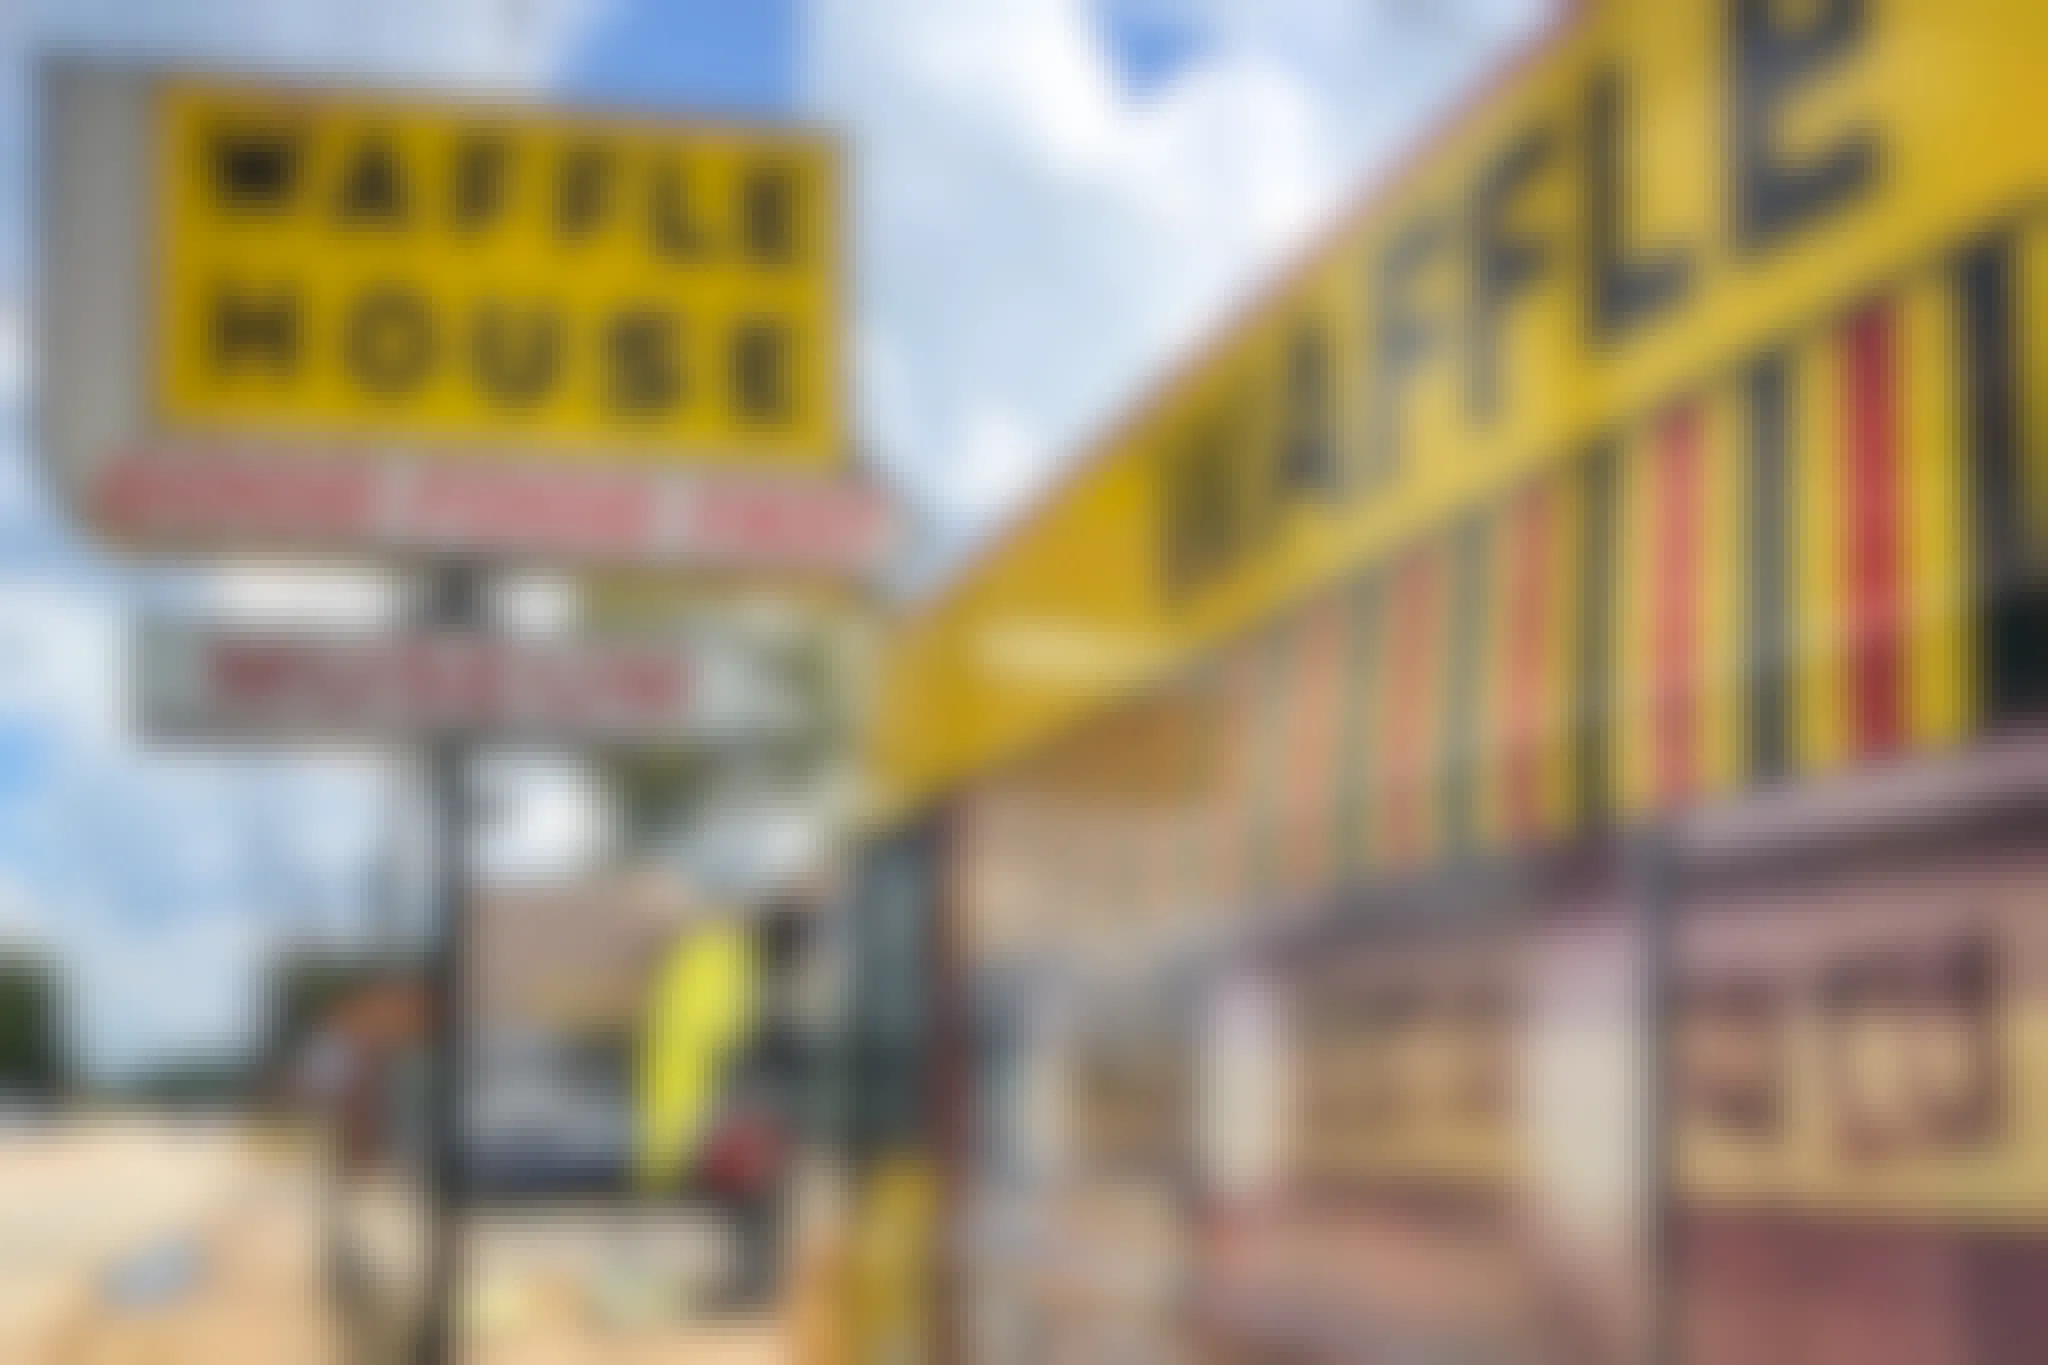 A sign for the Waffle House Museum outside of a Waffle House storefront.